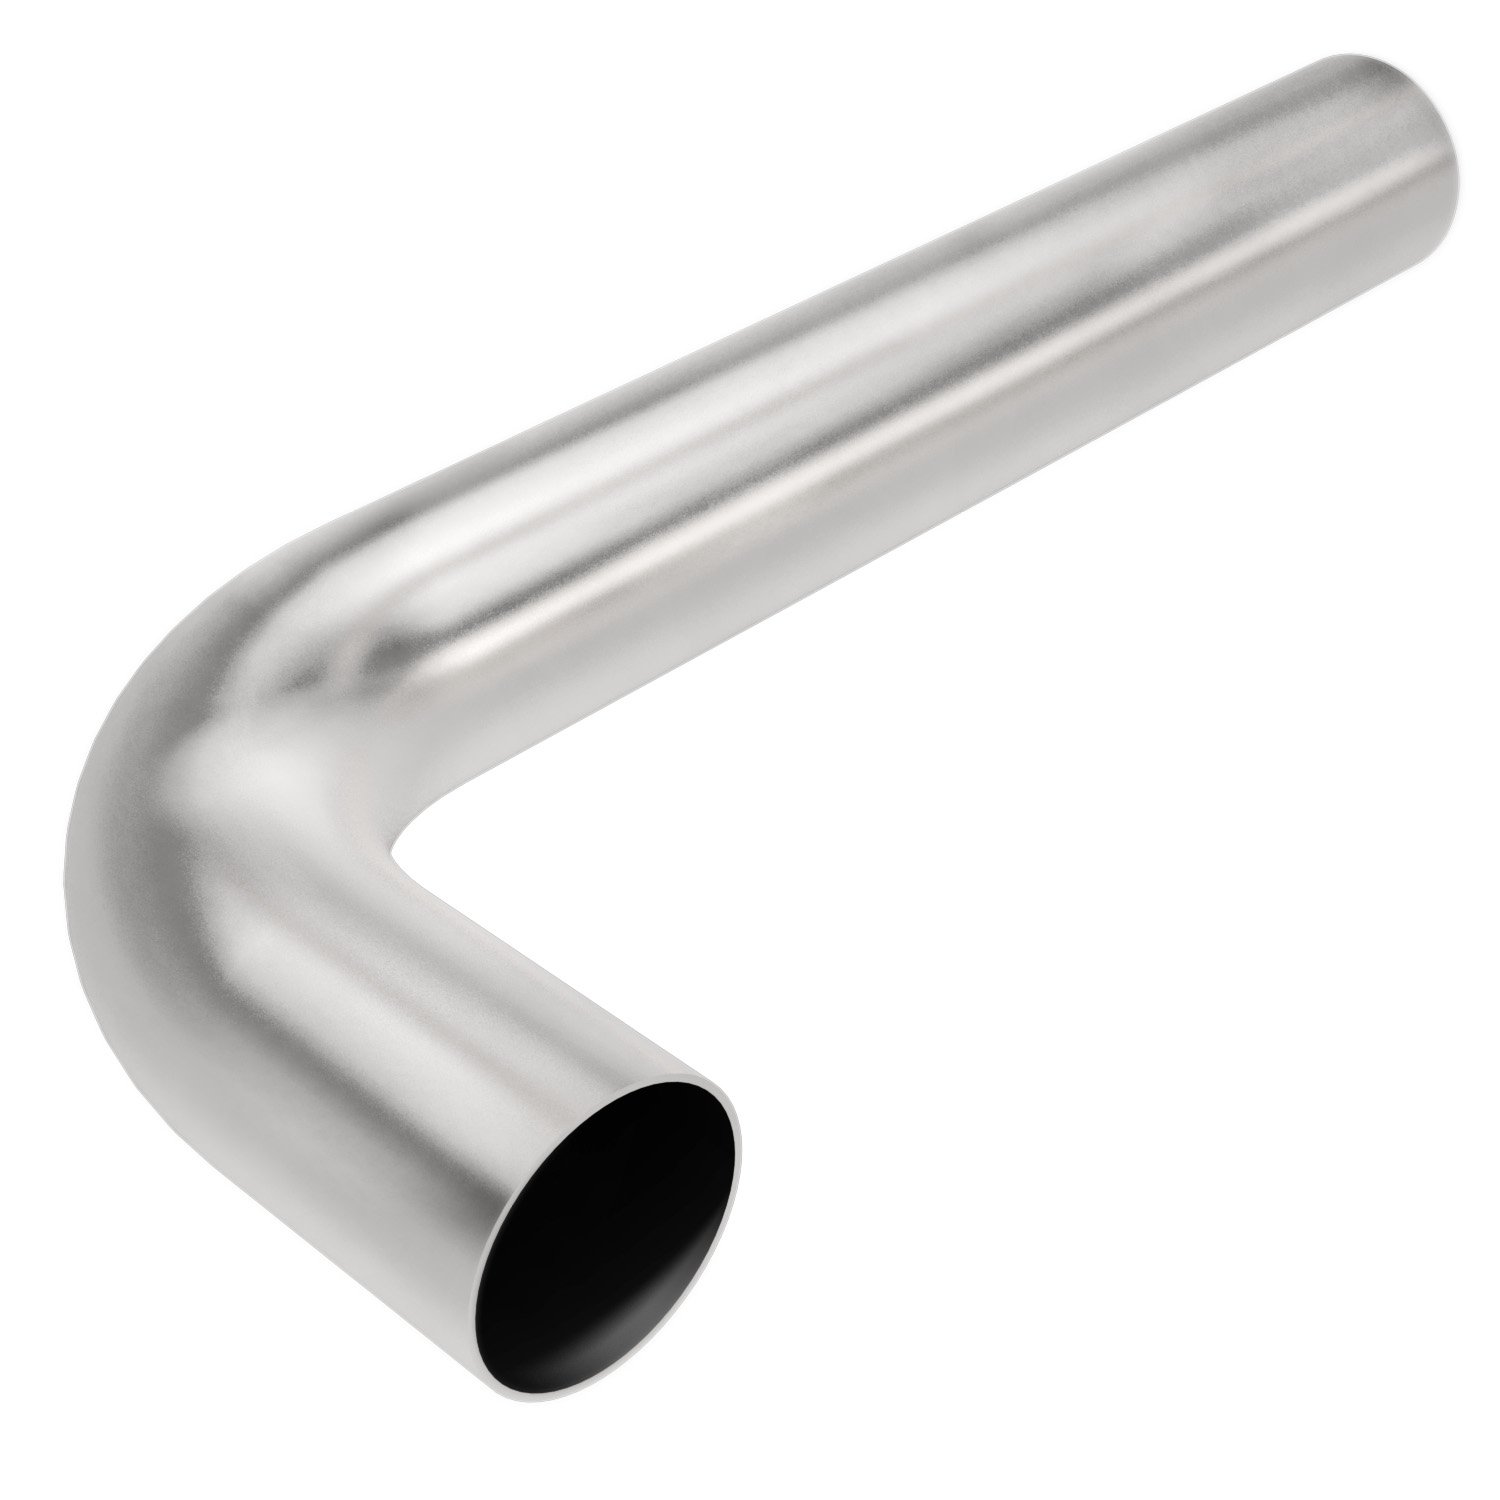 Stainless Steel 90° Transition Exhaust Pipes Outside Diameter: